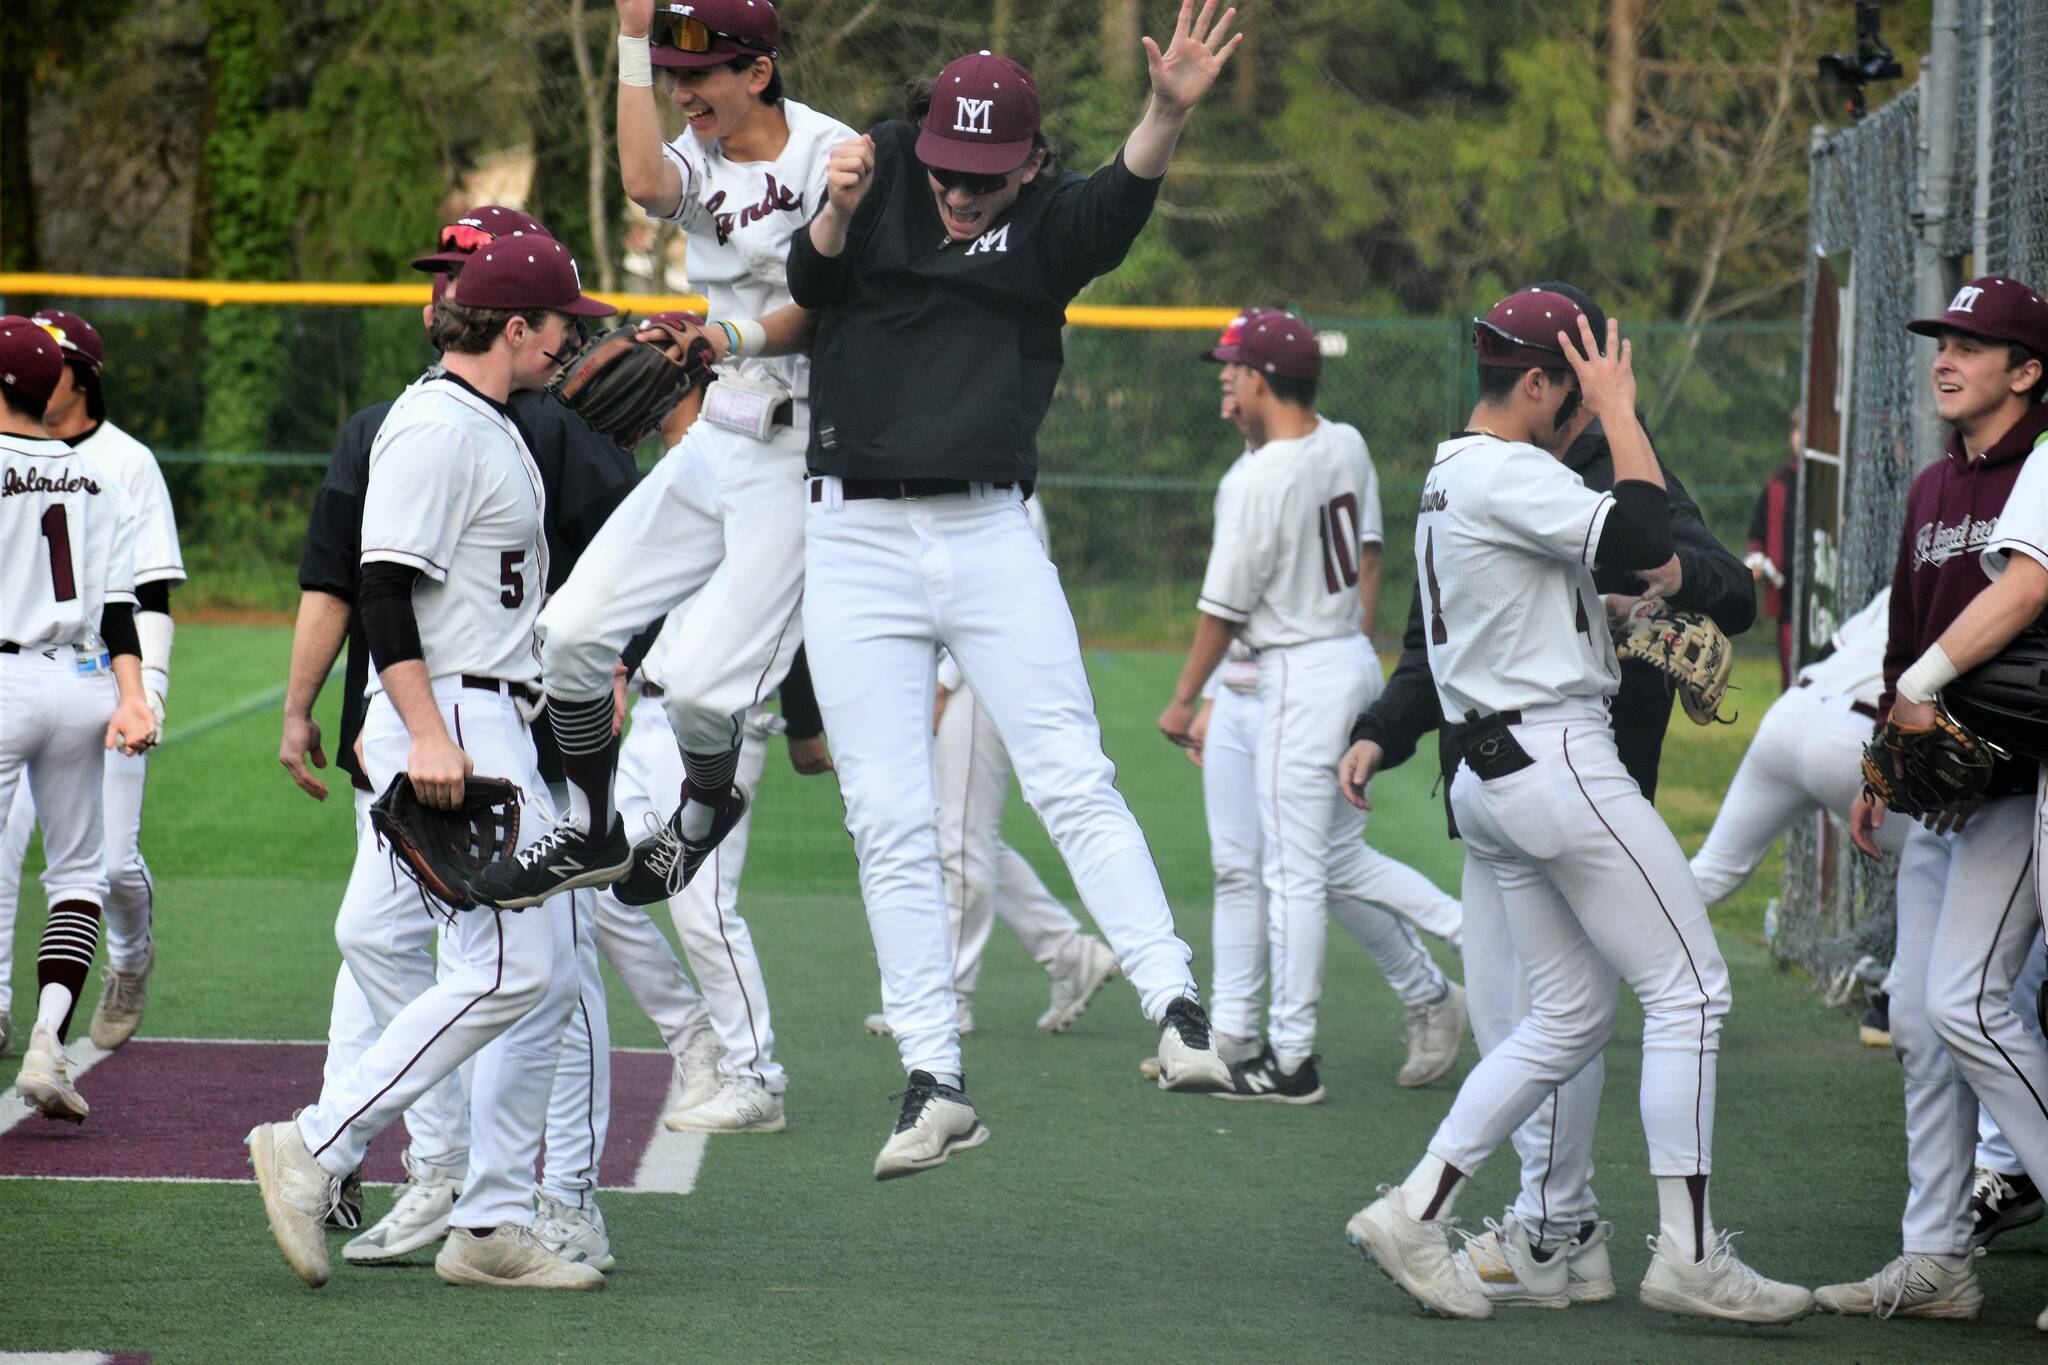 Mercer Island High School (MIHS) player Shane Deguchi and coach Garrett Poore (both center) celebrate the final out in the Islanders’ 3-0 baseball victory over Lake Washington High School on April 26 at Island Crest Park. Both teams share the 3A KingCo title with 10-2 records and will begin play in the league tournament on May 6 at Bannerwood Park in Bellevue. Earlier in the season, all teams drew straws in case of a tie and LW won the draw and is the No. 1 seed in the tournament and MIHS will get the second seed. At the MIHS Fan Appreciation and Alumni Night on April 26, school Class of 1985 alumnus and former pro pitcher Dave Wainhouse threw out the honorary first pitch. There were at least 300 spectators at the game, an estimated 150 hot dogs and 80 hamburgers sold and many prizes given away such as MIHS Baseball blankets, hats and sweatshirts. Photo courtesy of Kym Otte